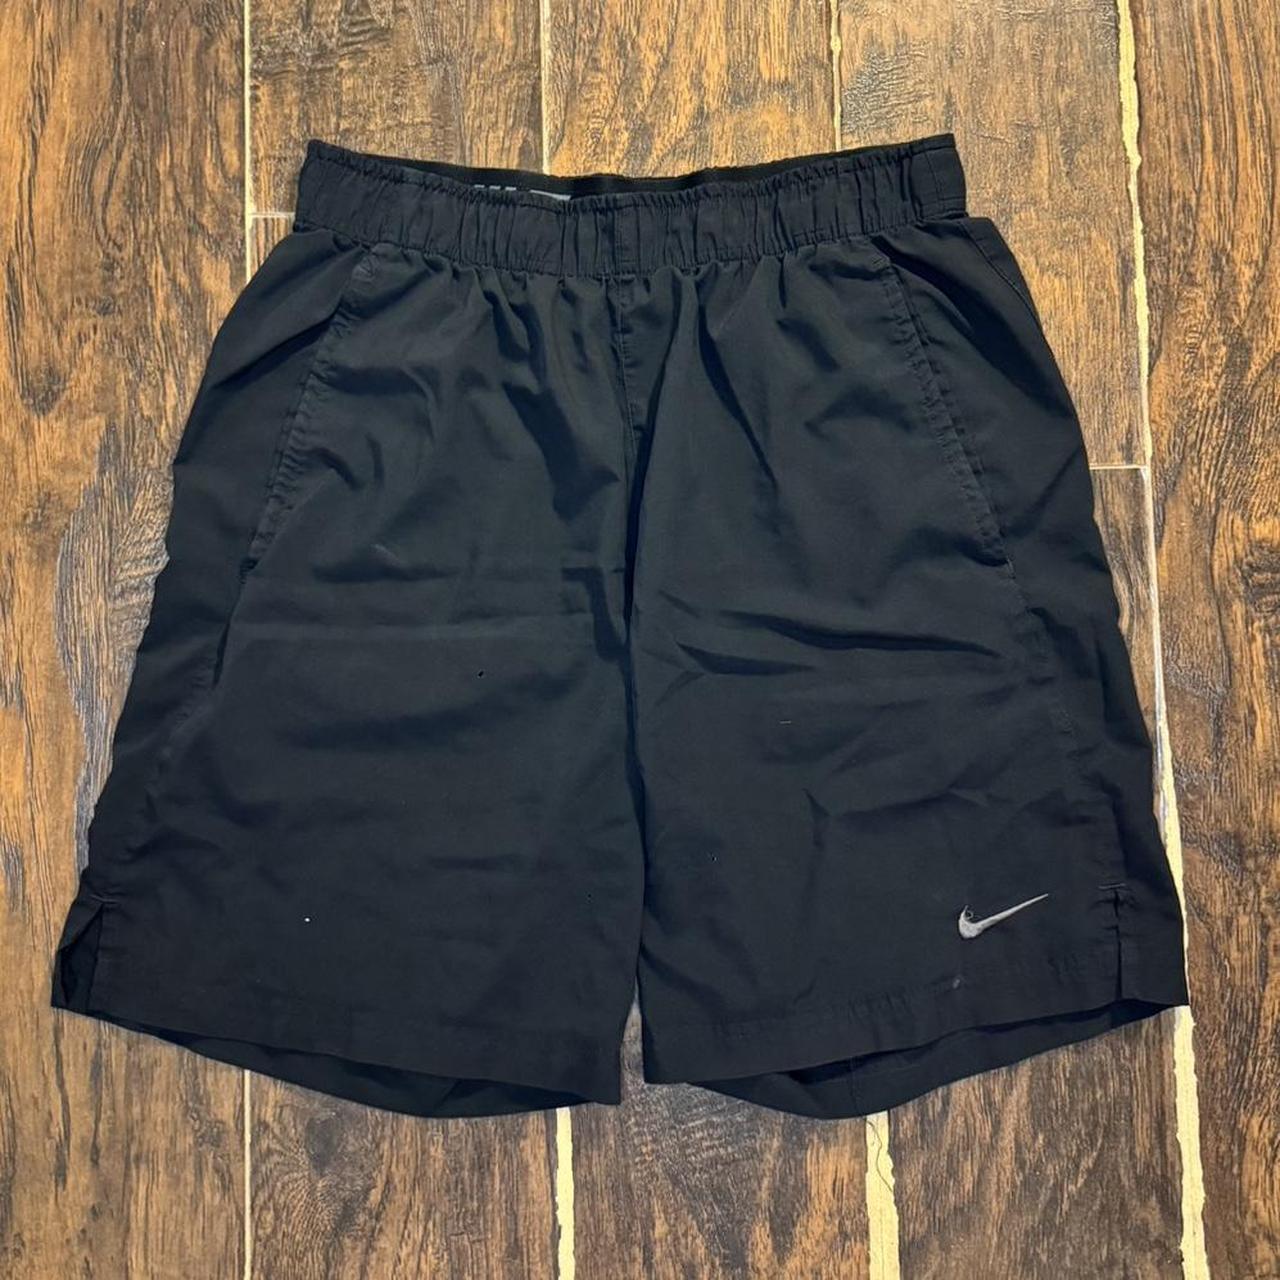 Black Nike Dri-Fit Shorts Size M Great For Sports Or... - Depop